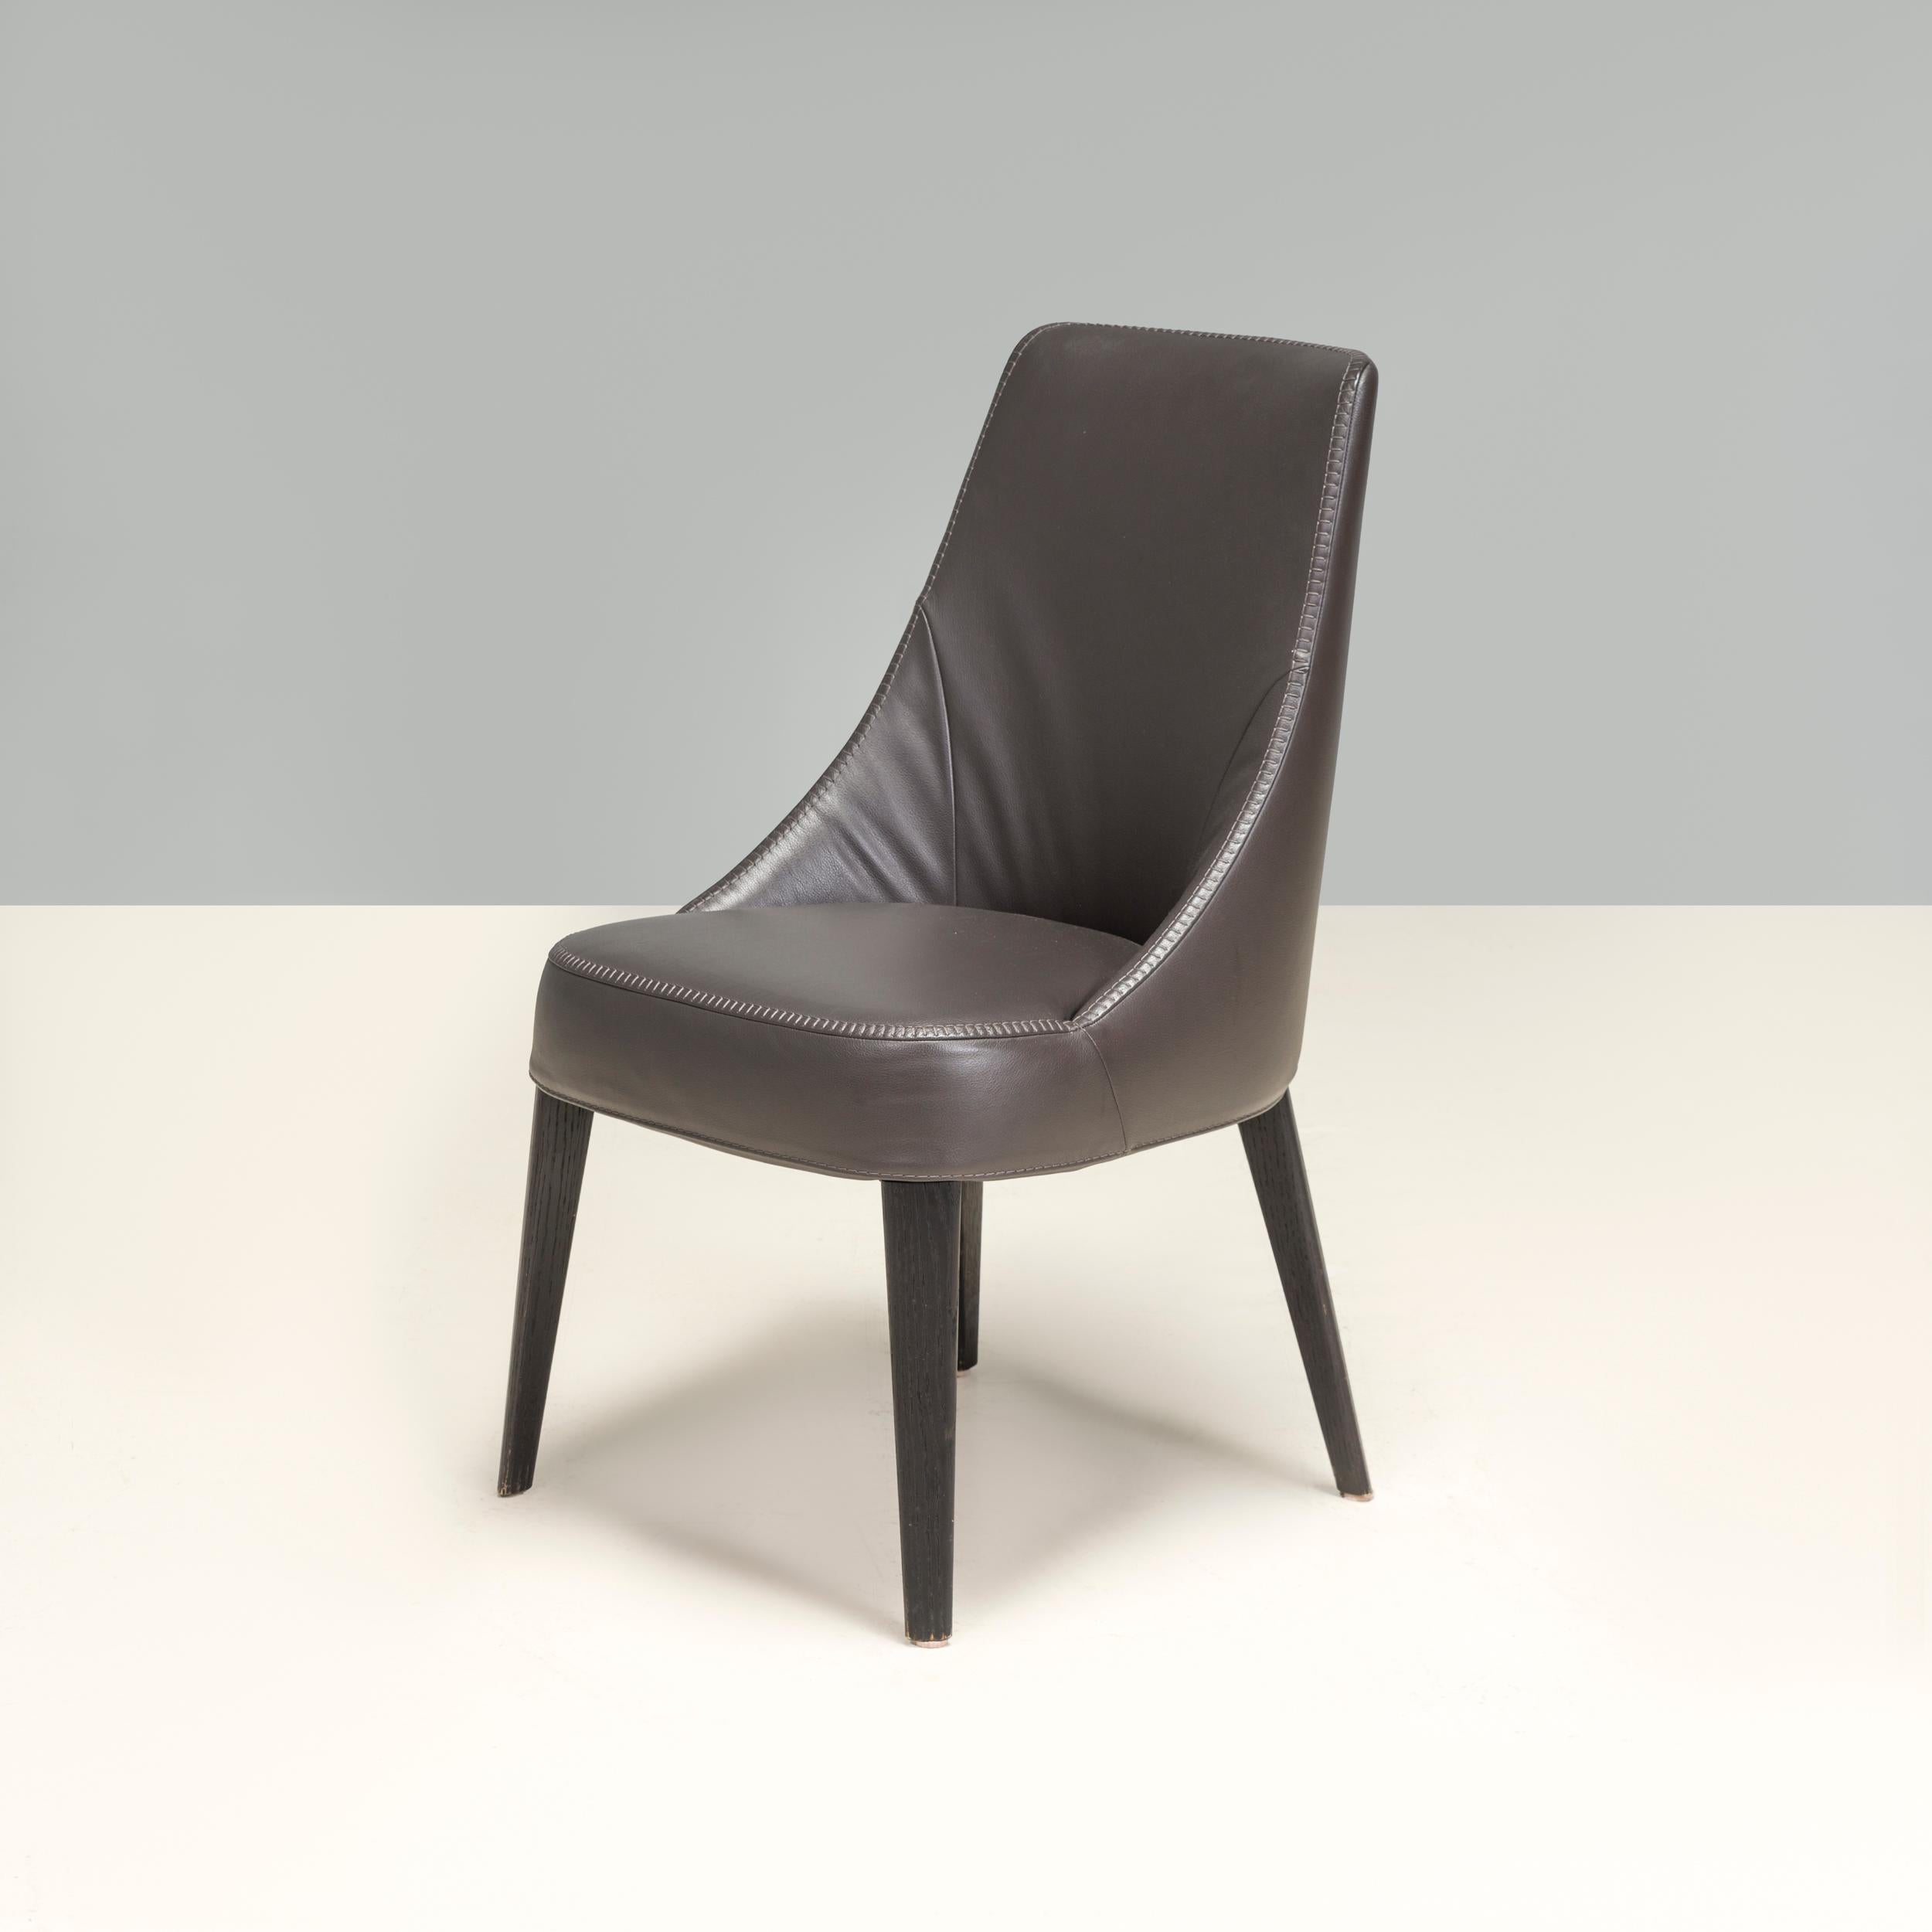 Maxalto by Antonio Citterio Febo Brown Leather Dining Chairs, Set of 10 In Good Condition For Sale In London, GB